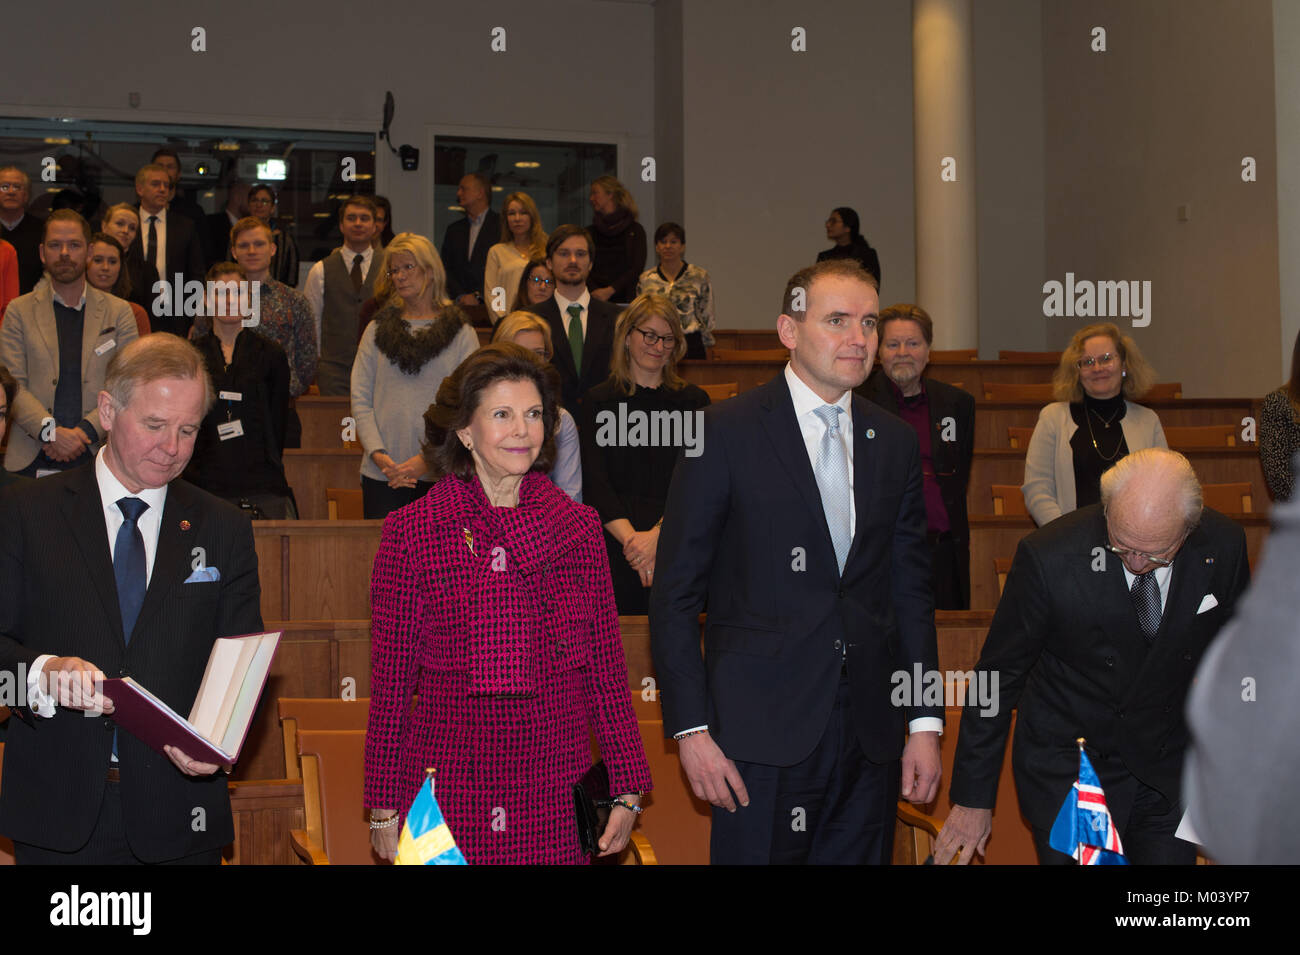 Stockholm, Sweden. 18th Jan, 2018. From 17 to 19 January, Iceland's President Guðni Thorlacius Jóhannesson, visiting Sweden at the invitation of The King. President Jóhannesson visiting Sweden with his wife, Eliza Jean Reid. The royal couple and the presidential couple visiting Karolinska Institutet/Nobel Forum. Credit: Barbro Bergfeldt/Alamy Live News Stock Photo